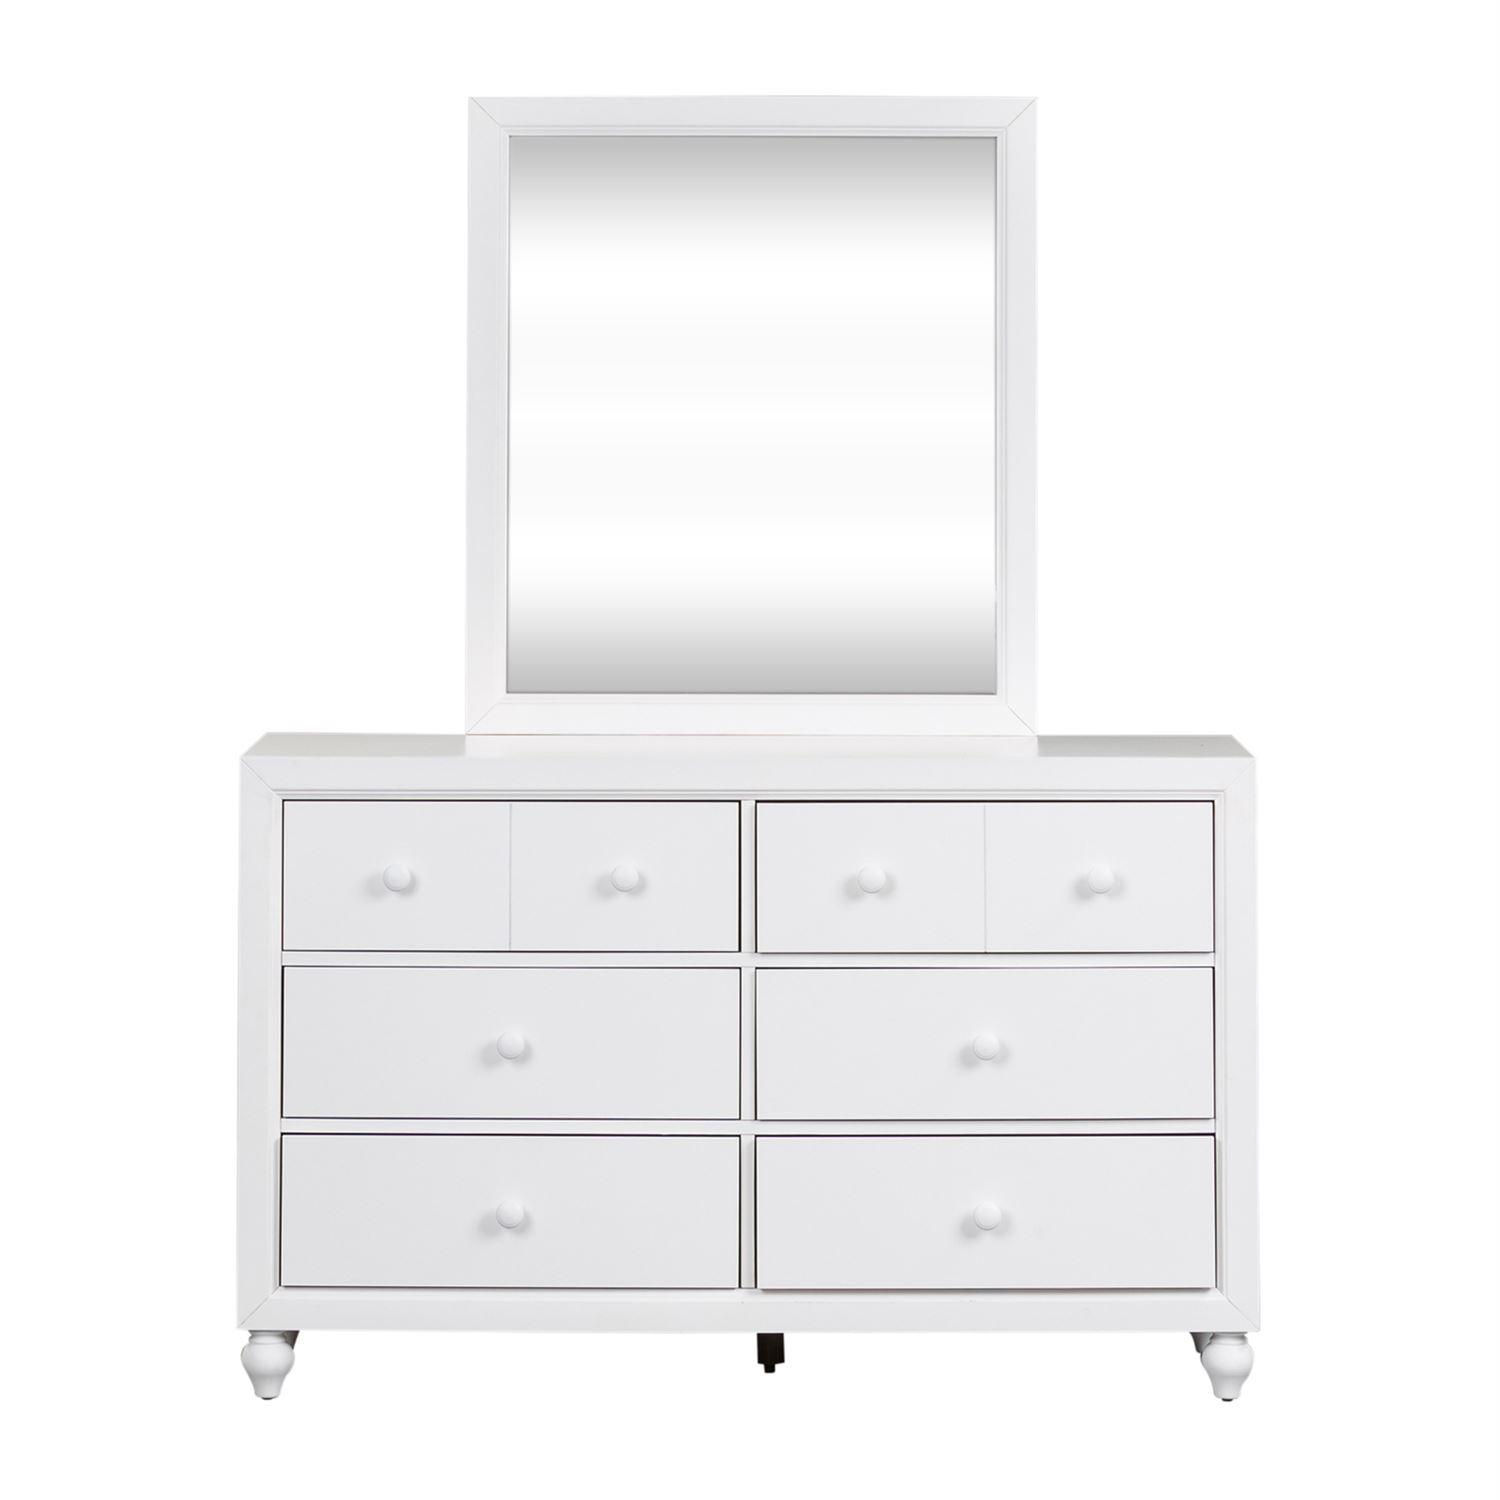 Cottage Combo Dresser Cottage View  (523-YBR) Combo Dresser 523-YBR-DM in White 